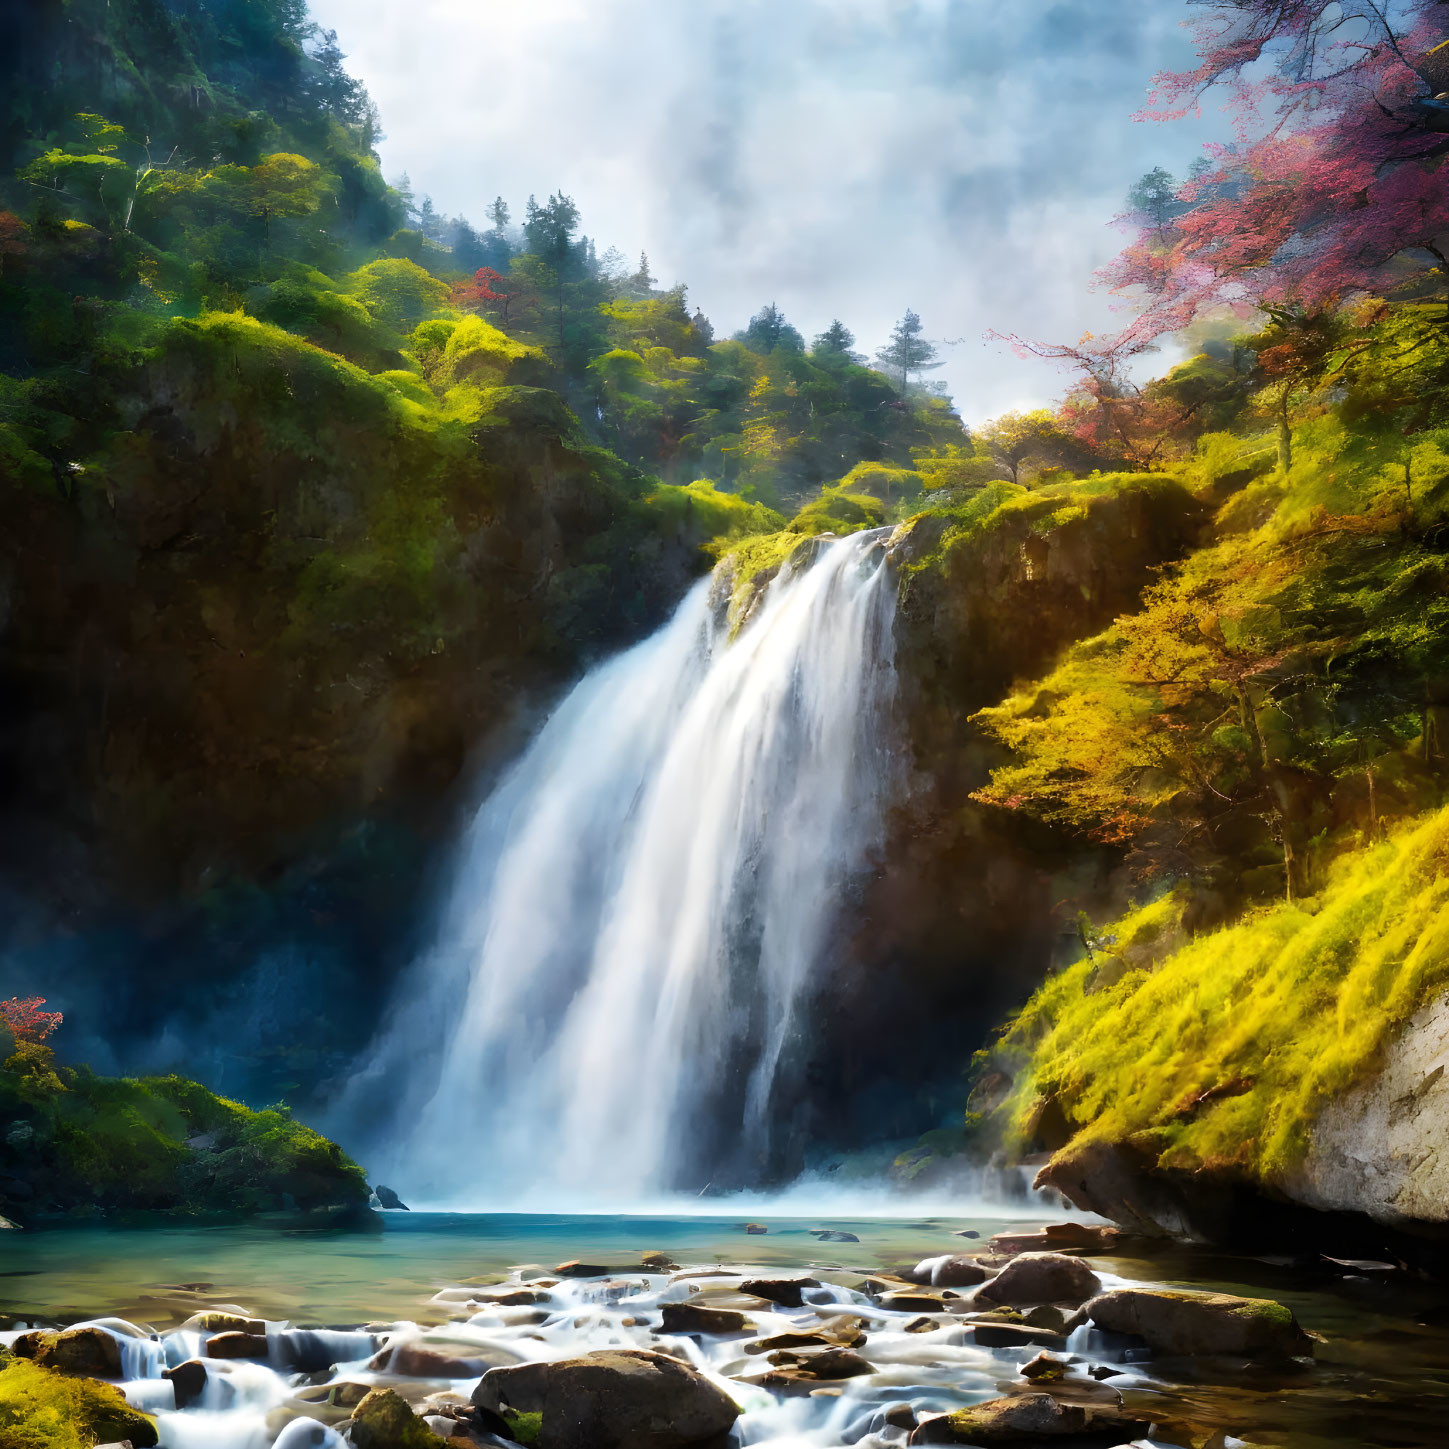 Autumn Waterfall Scene with Vibrant Foliage and Misty Air